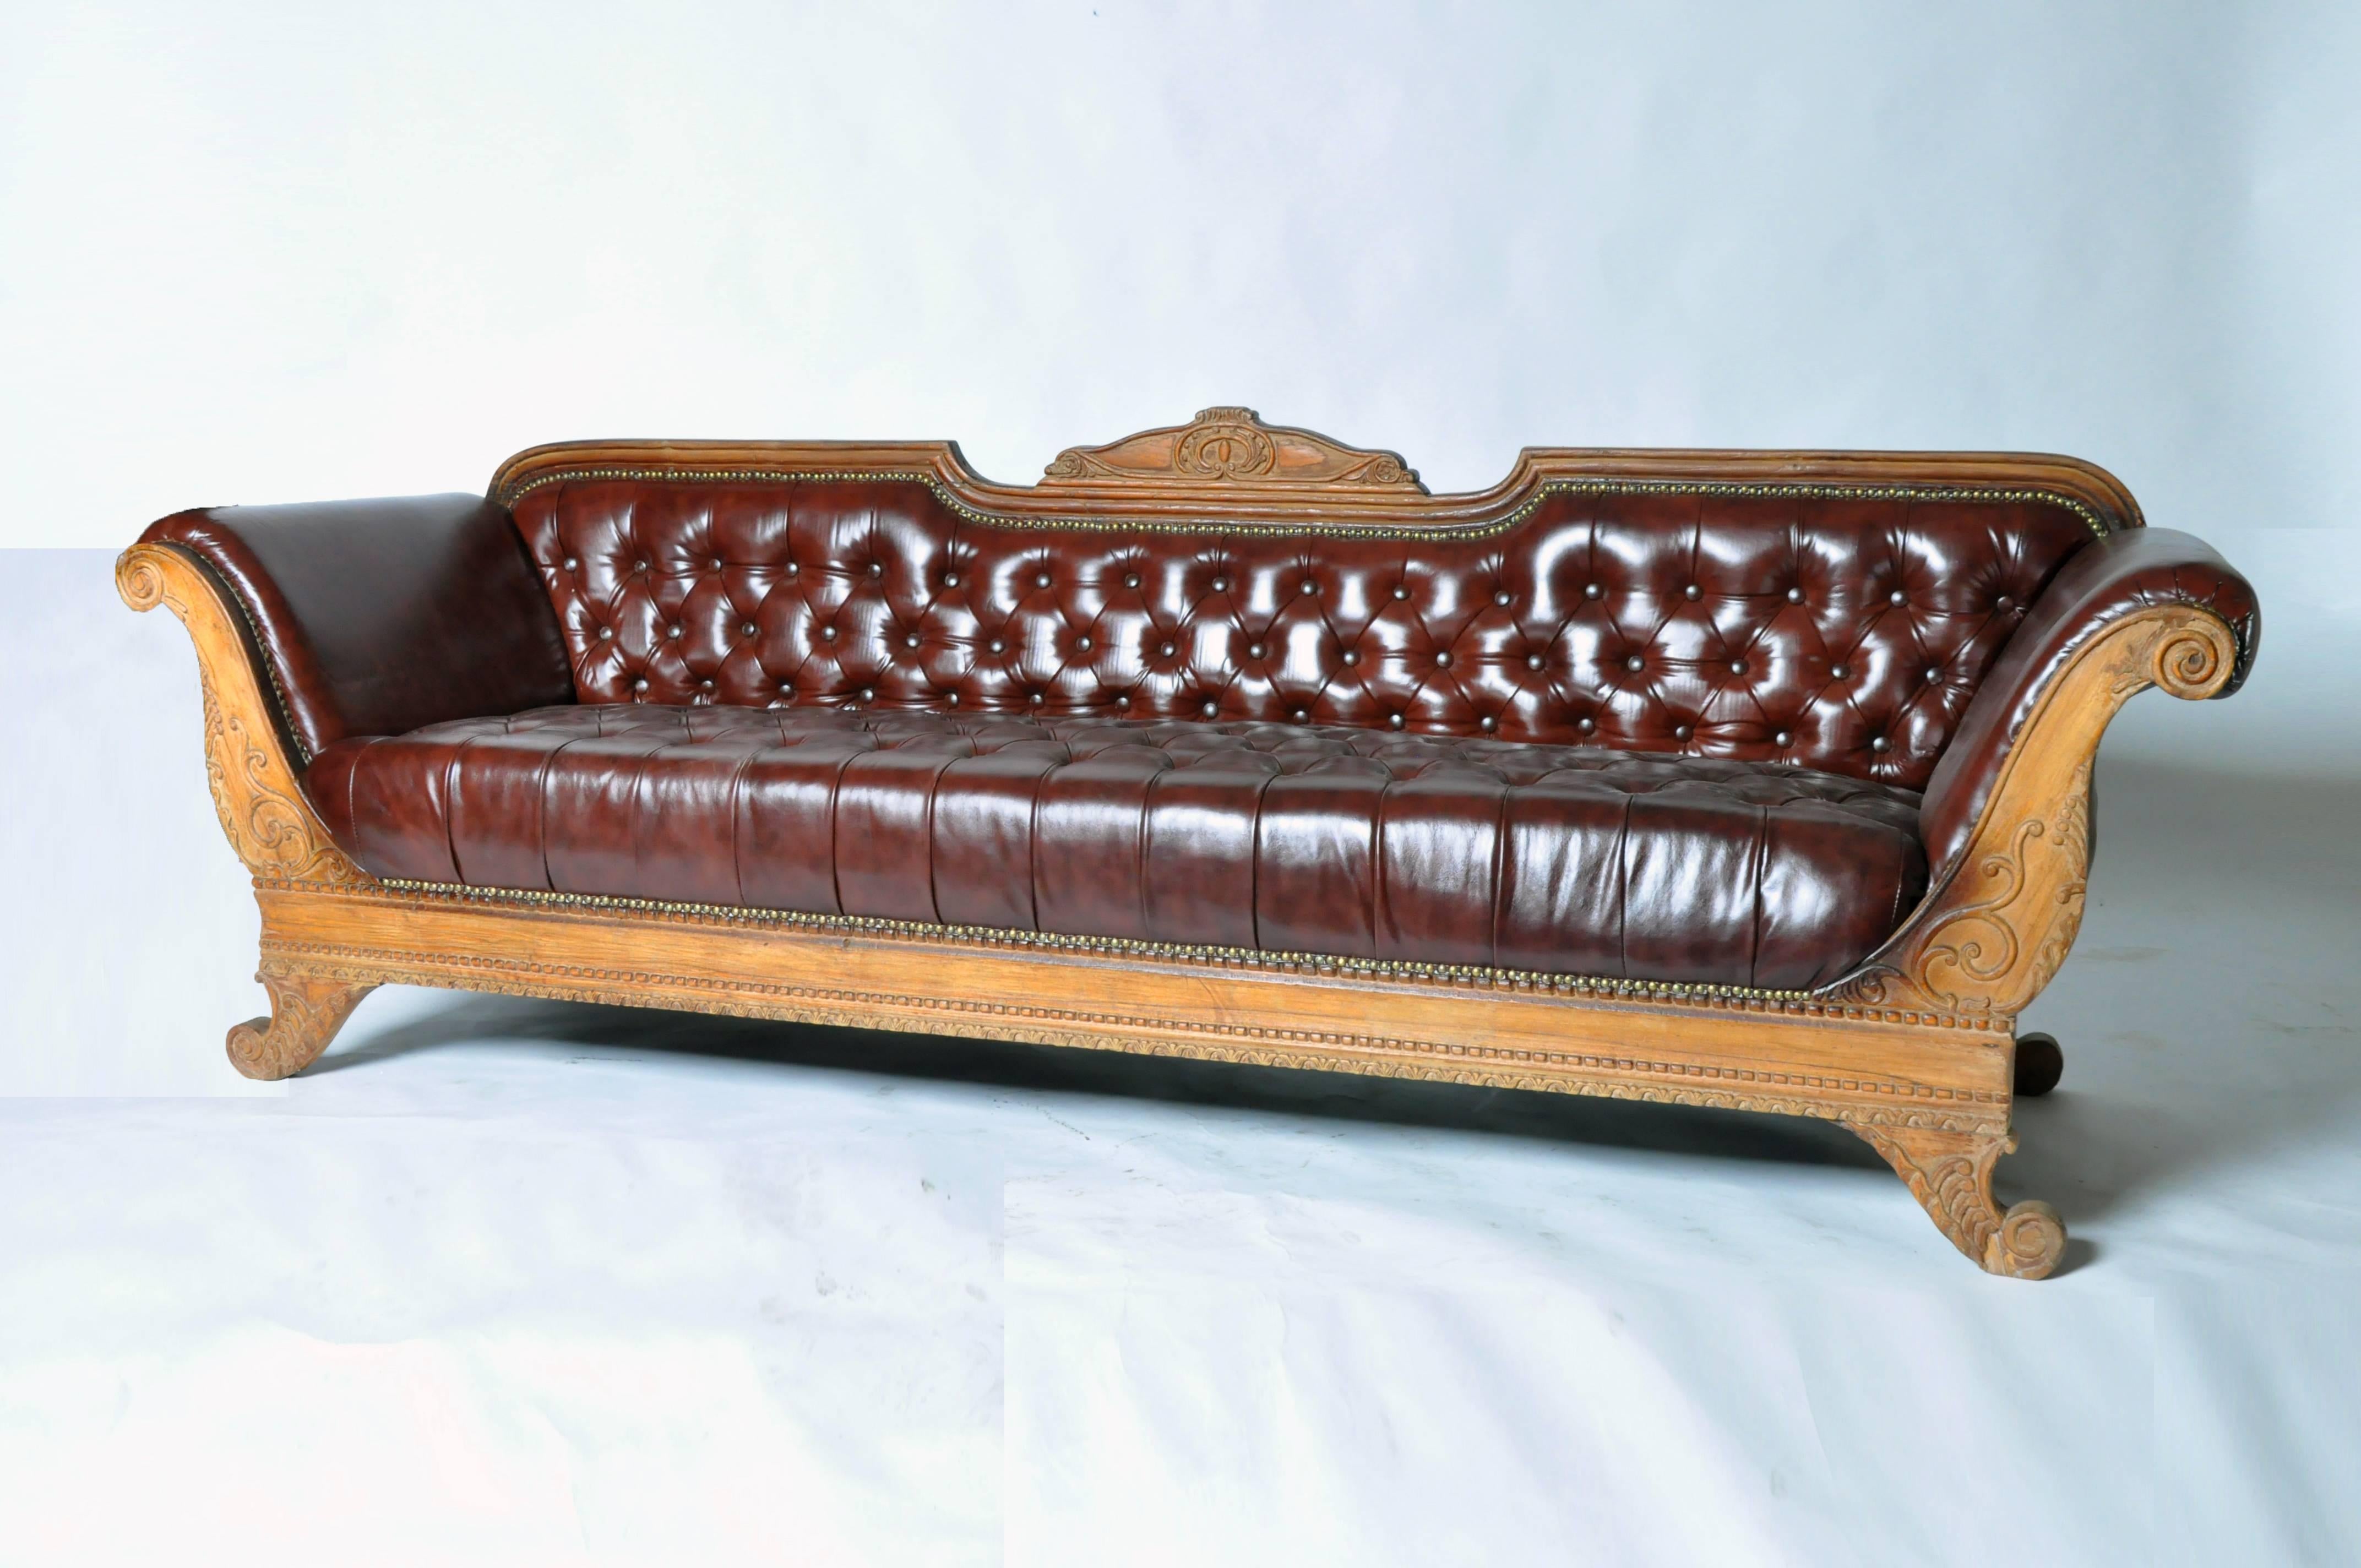 This handsome British Raj style sofa features hand-carved teakwood and is from Gujarat, India.